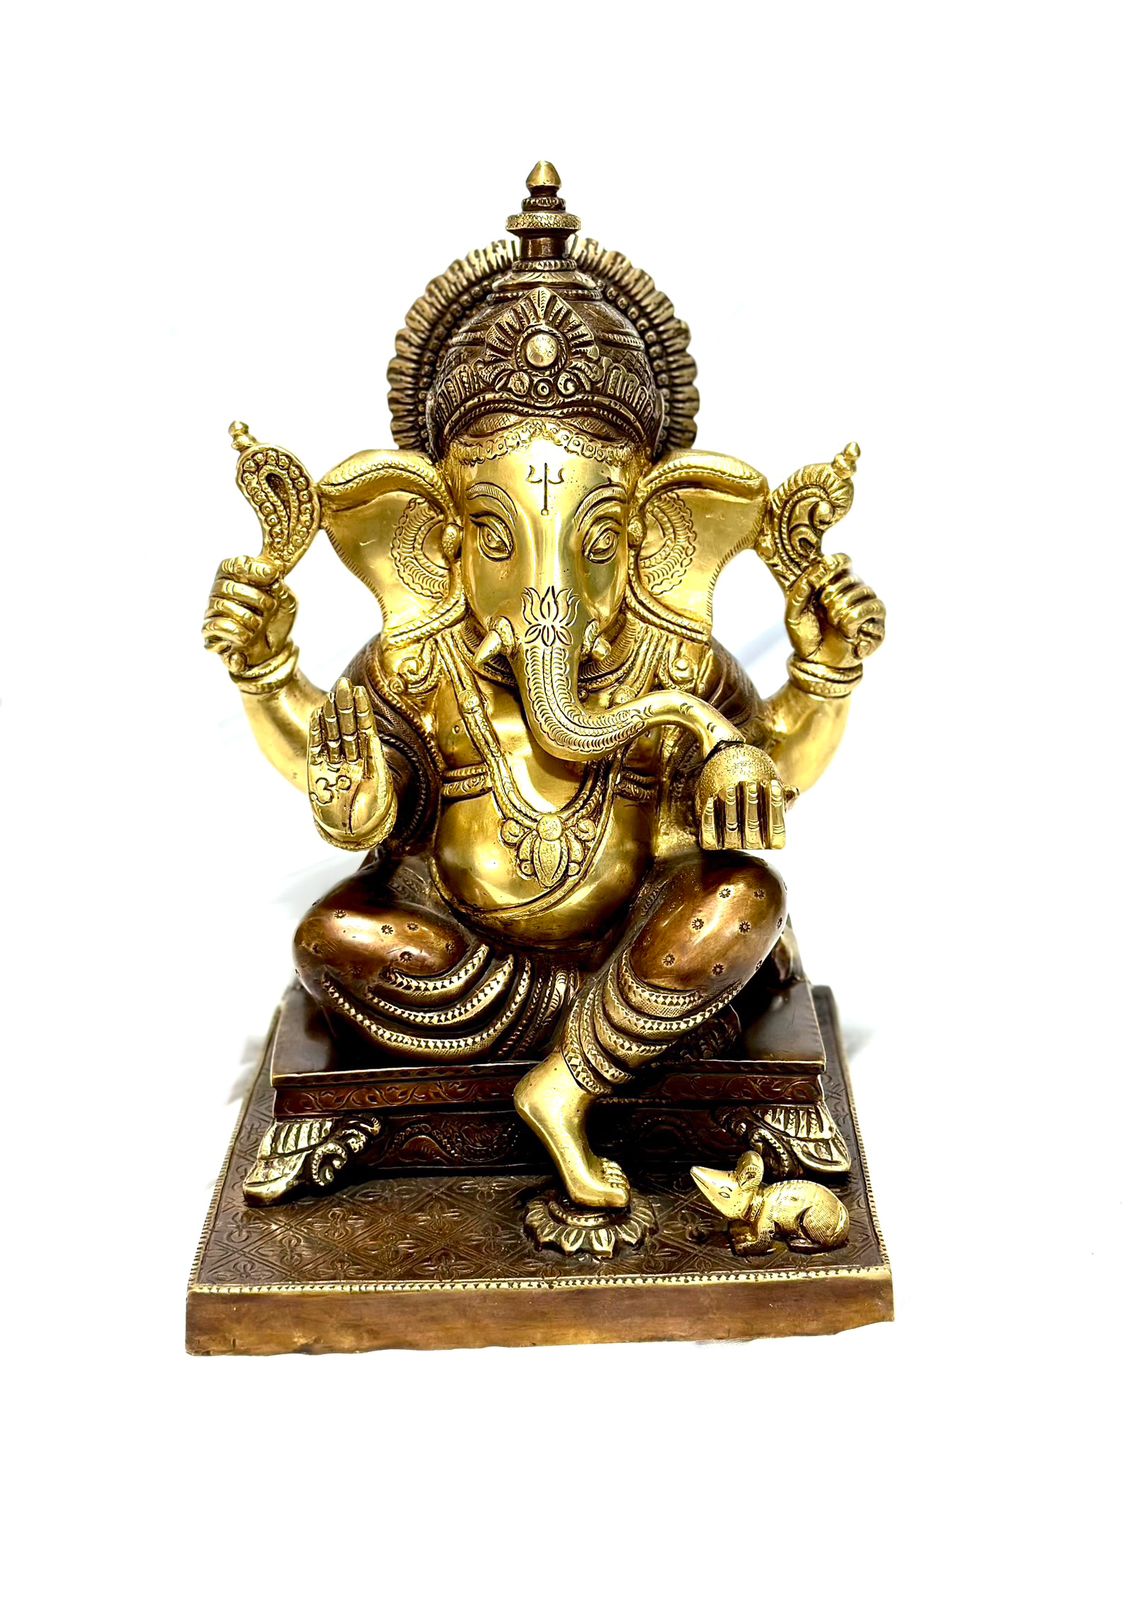 Unique Creation Of Brass In Form Of Ganesha Idol In Exclusive Models By Tamrapatra